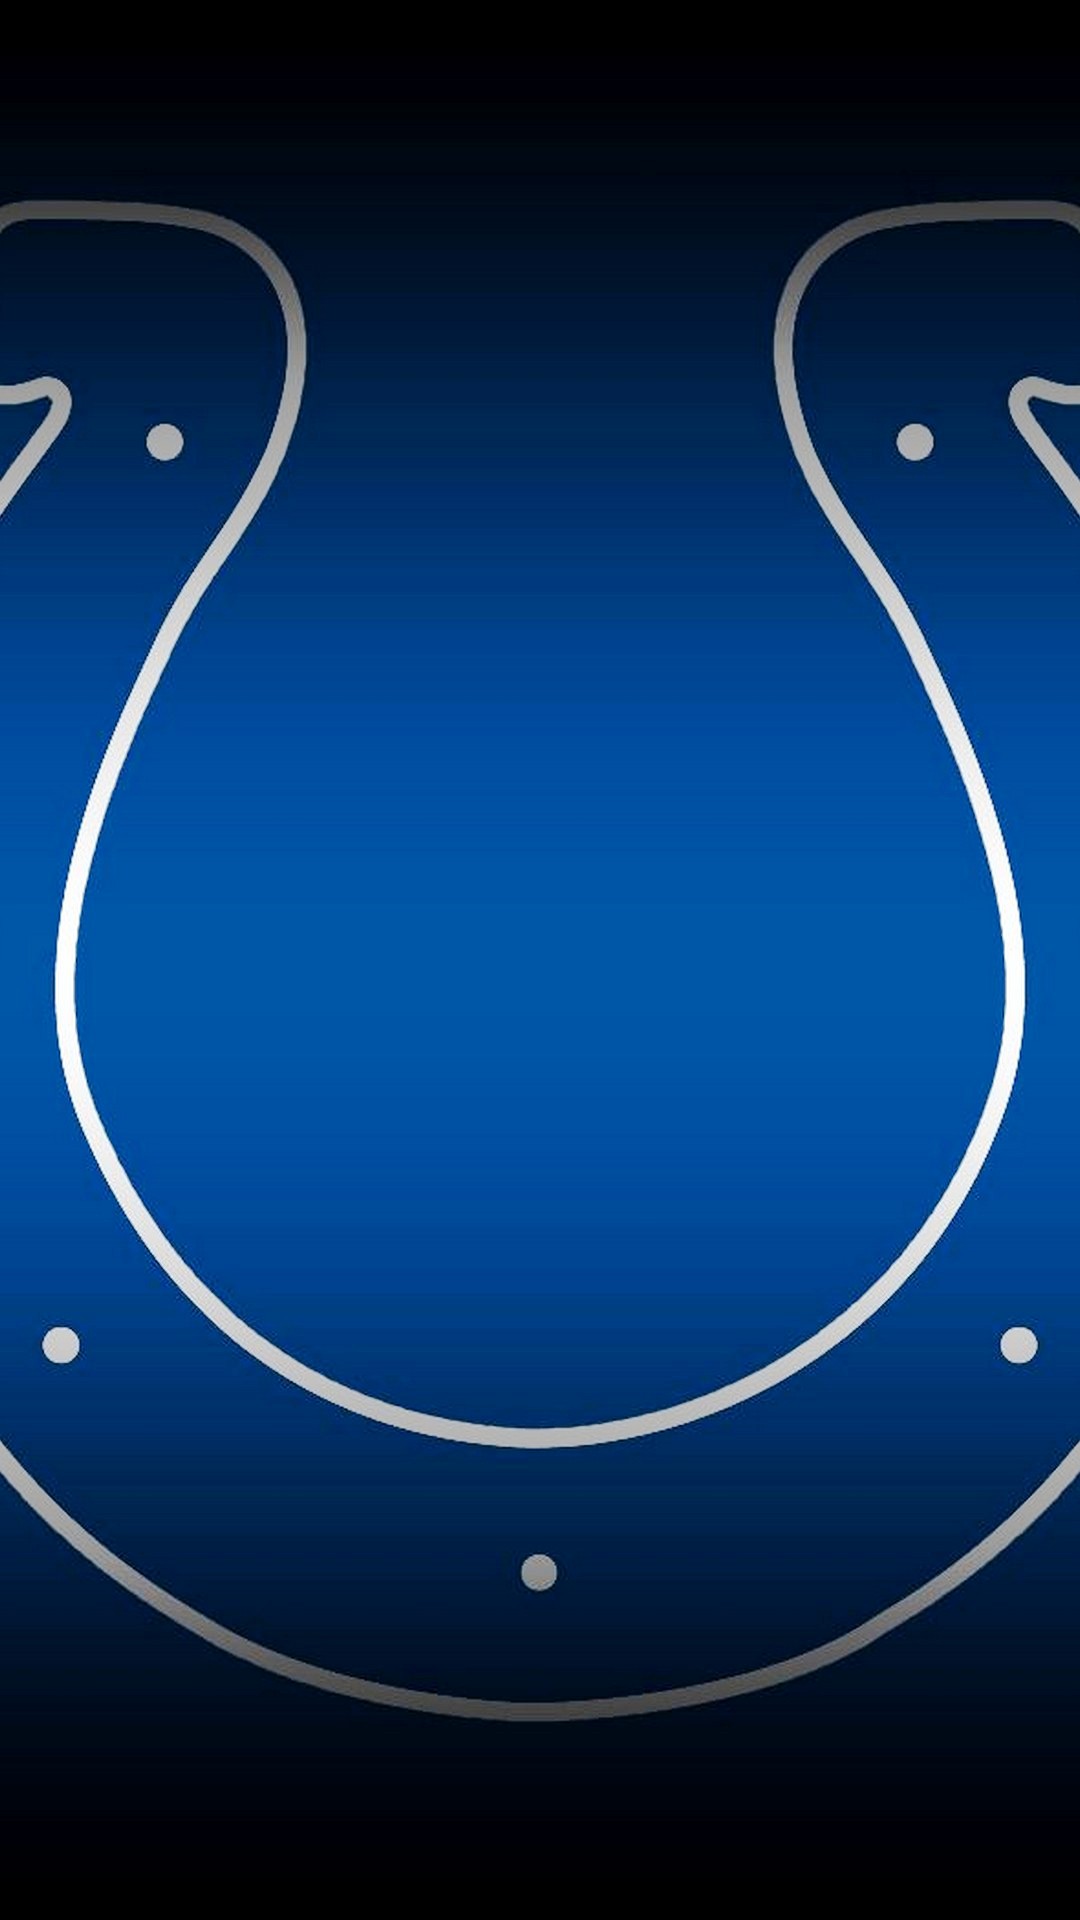 Indianapolis Colts NFL iPhone Wallpaper Size With high-resolution 1080X1920 pixel. Donwload and set as wallpaper for your iPhone X, iPhone XS home screen backgrounds, XS Max, XR, iPhone8 lock screen wallpaper, iPhone 7, 6, SE, and other mobile devices